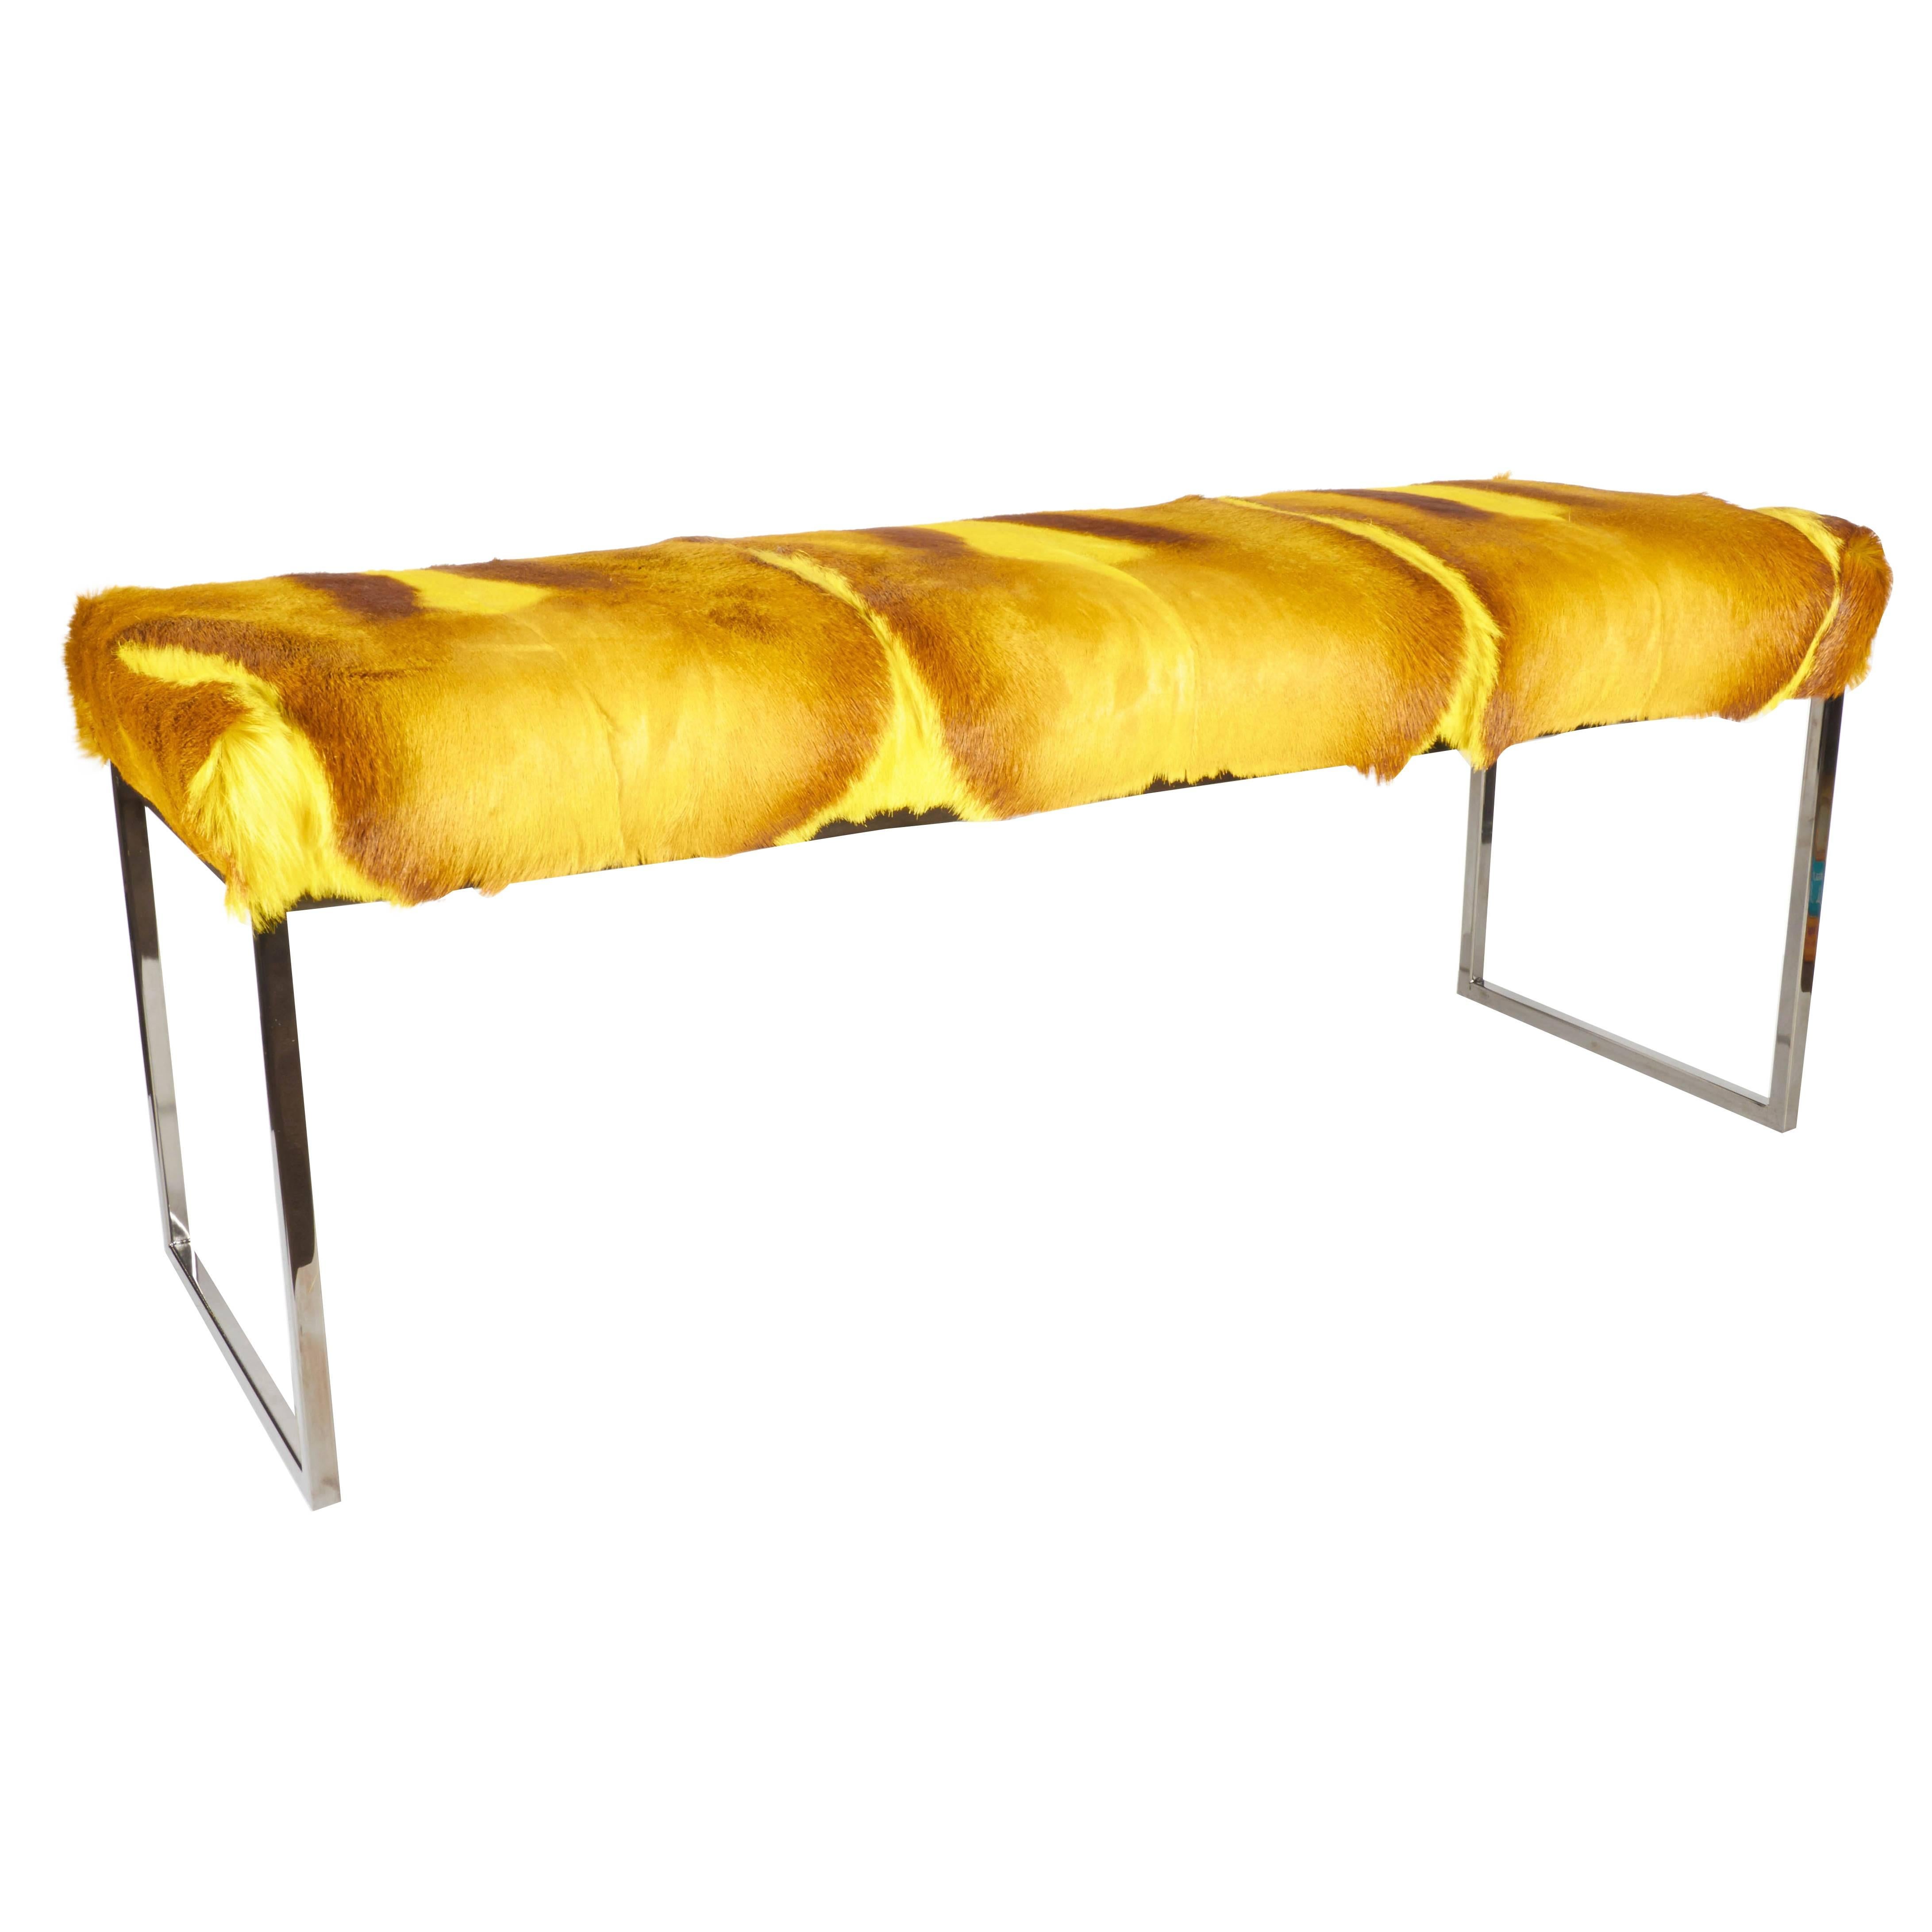 Exotic African springbok bench in hues of vibrant yellow. Mid-Century Modern design with streamline base in black chrome. Hand-dyed and comprised of several hides featuring multiple spine details. Excellent accent piece for any room.